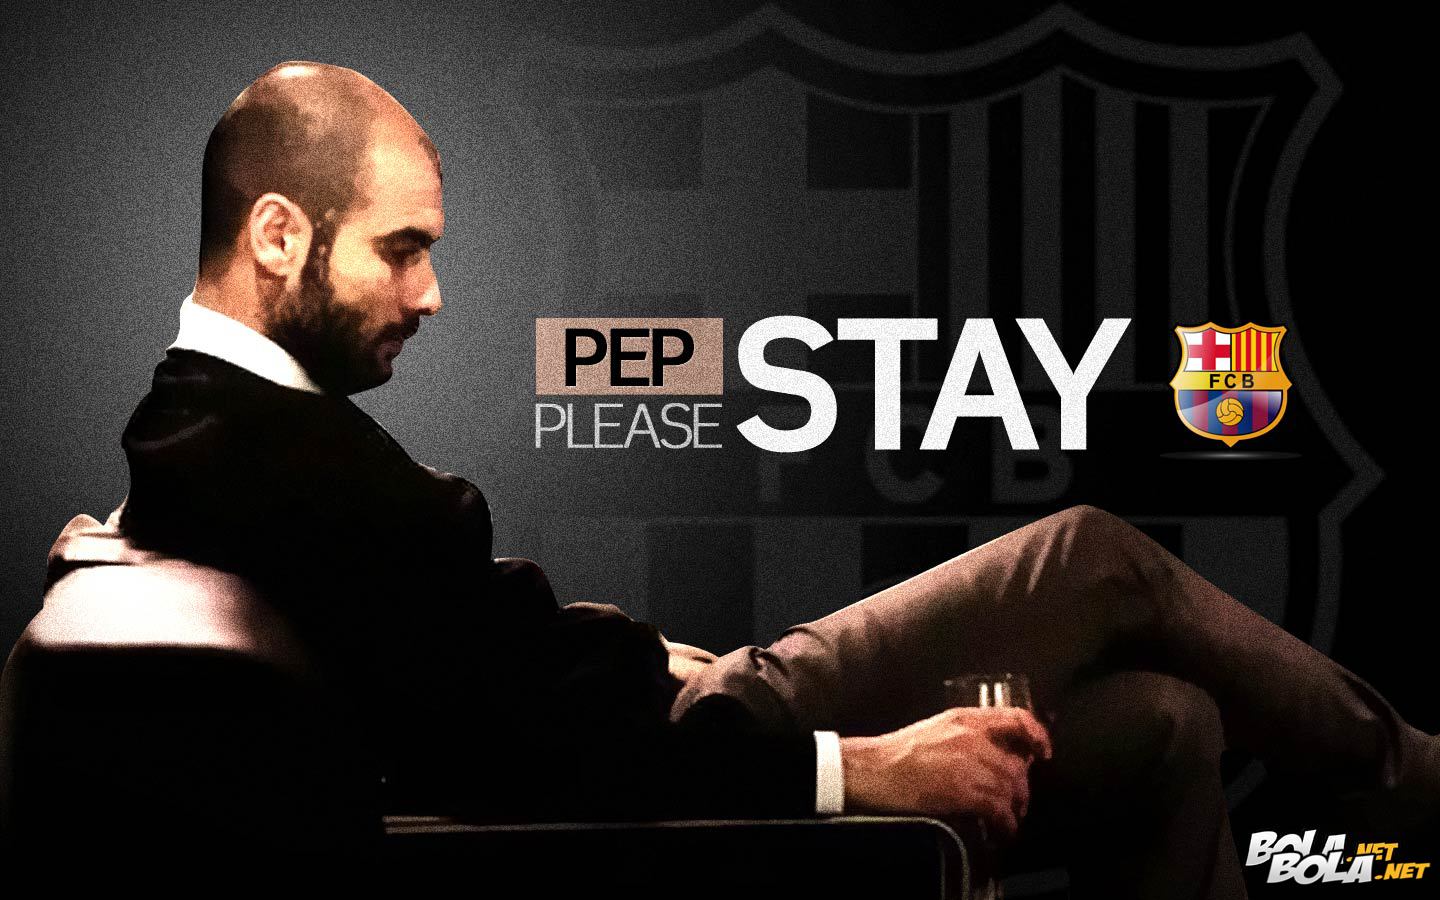 Deskripsi : Wallpaper Pep Please Stay At Barca, size: 1440x900